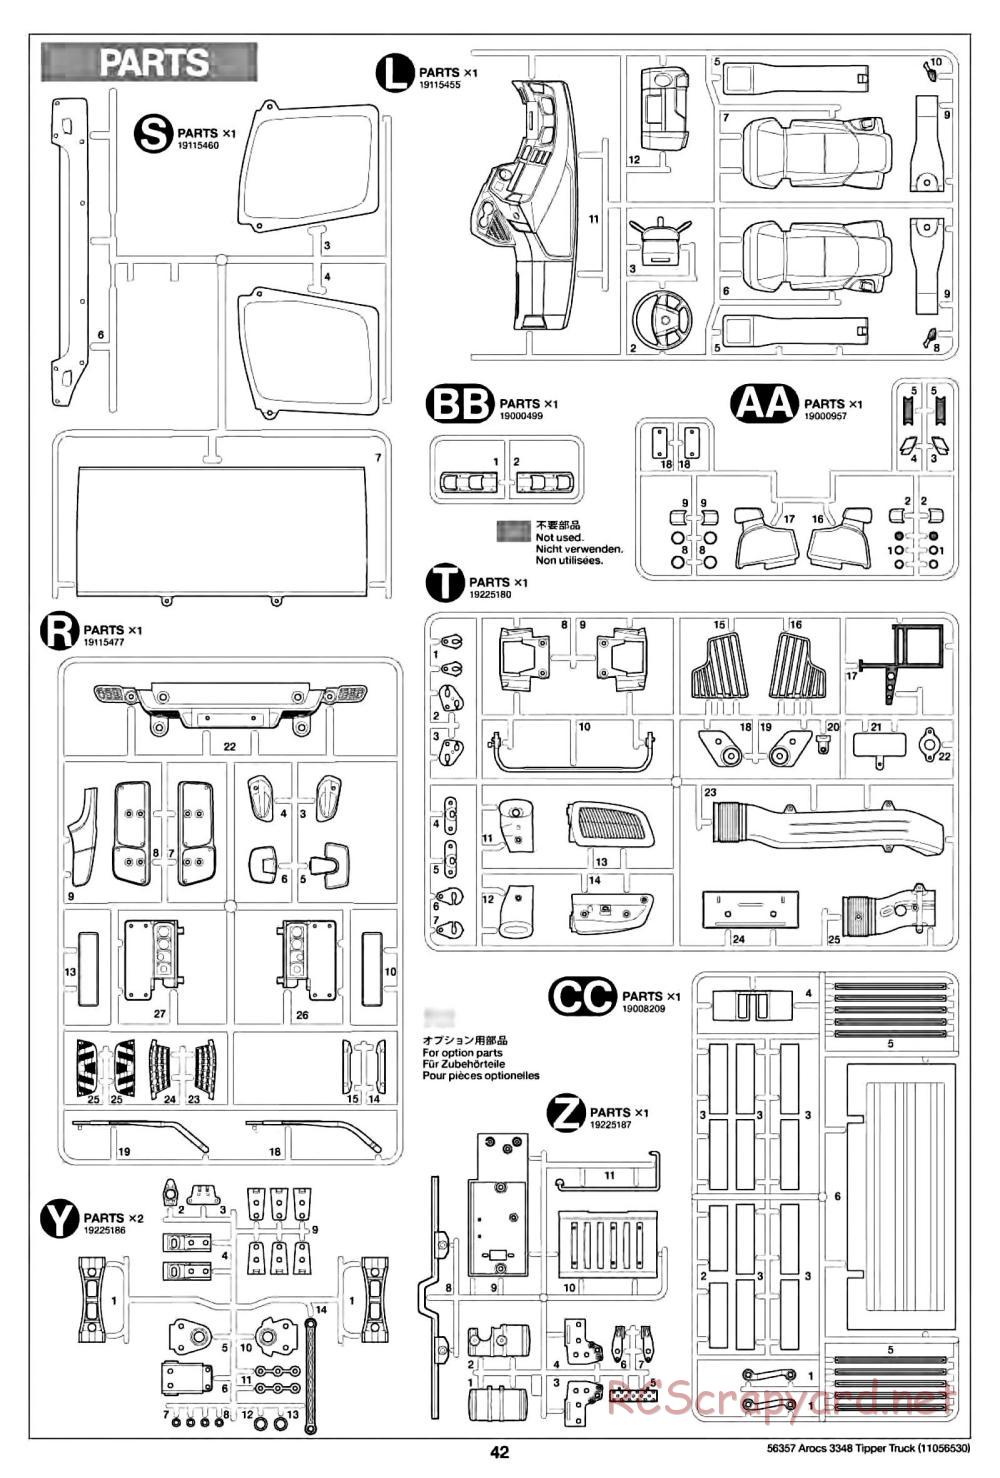 Tamiya - Mercedes-Benz Arocs 3348 6x4 Tipper Truck Chassis - Manual - Page 42